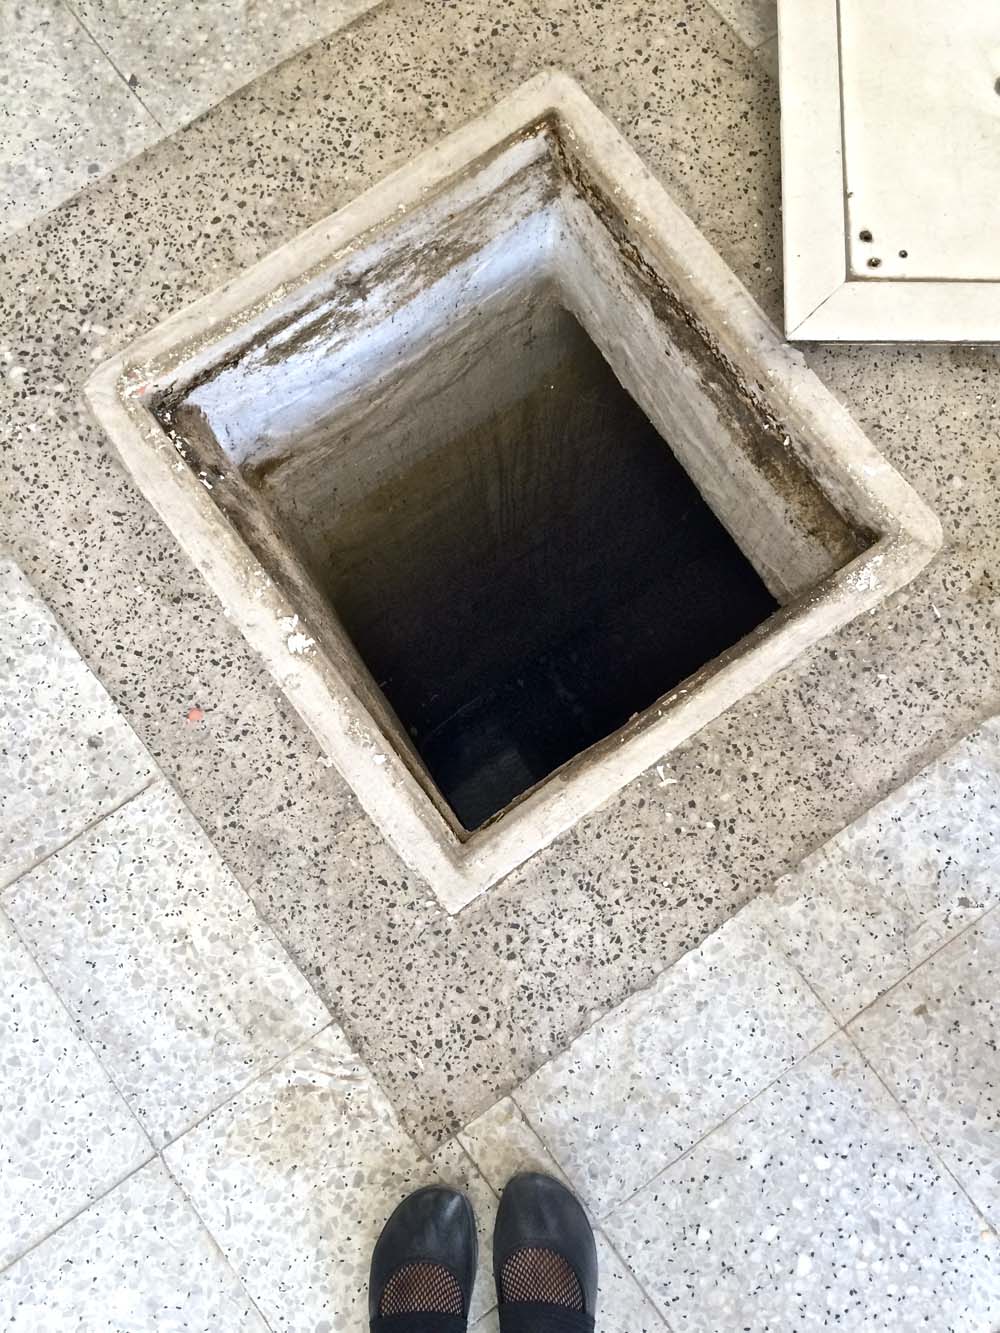 and in the floor is this: one of a few wells scattered around the courtyard. of course this is covered by the lid you see in the top right corner. either way, i'd be terrified to have something like this in my courtyard